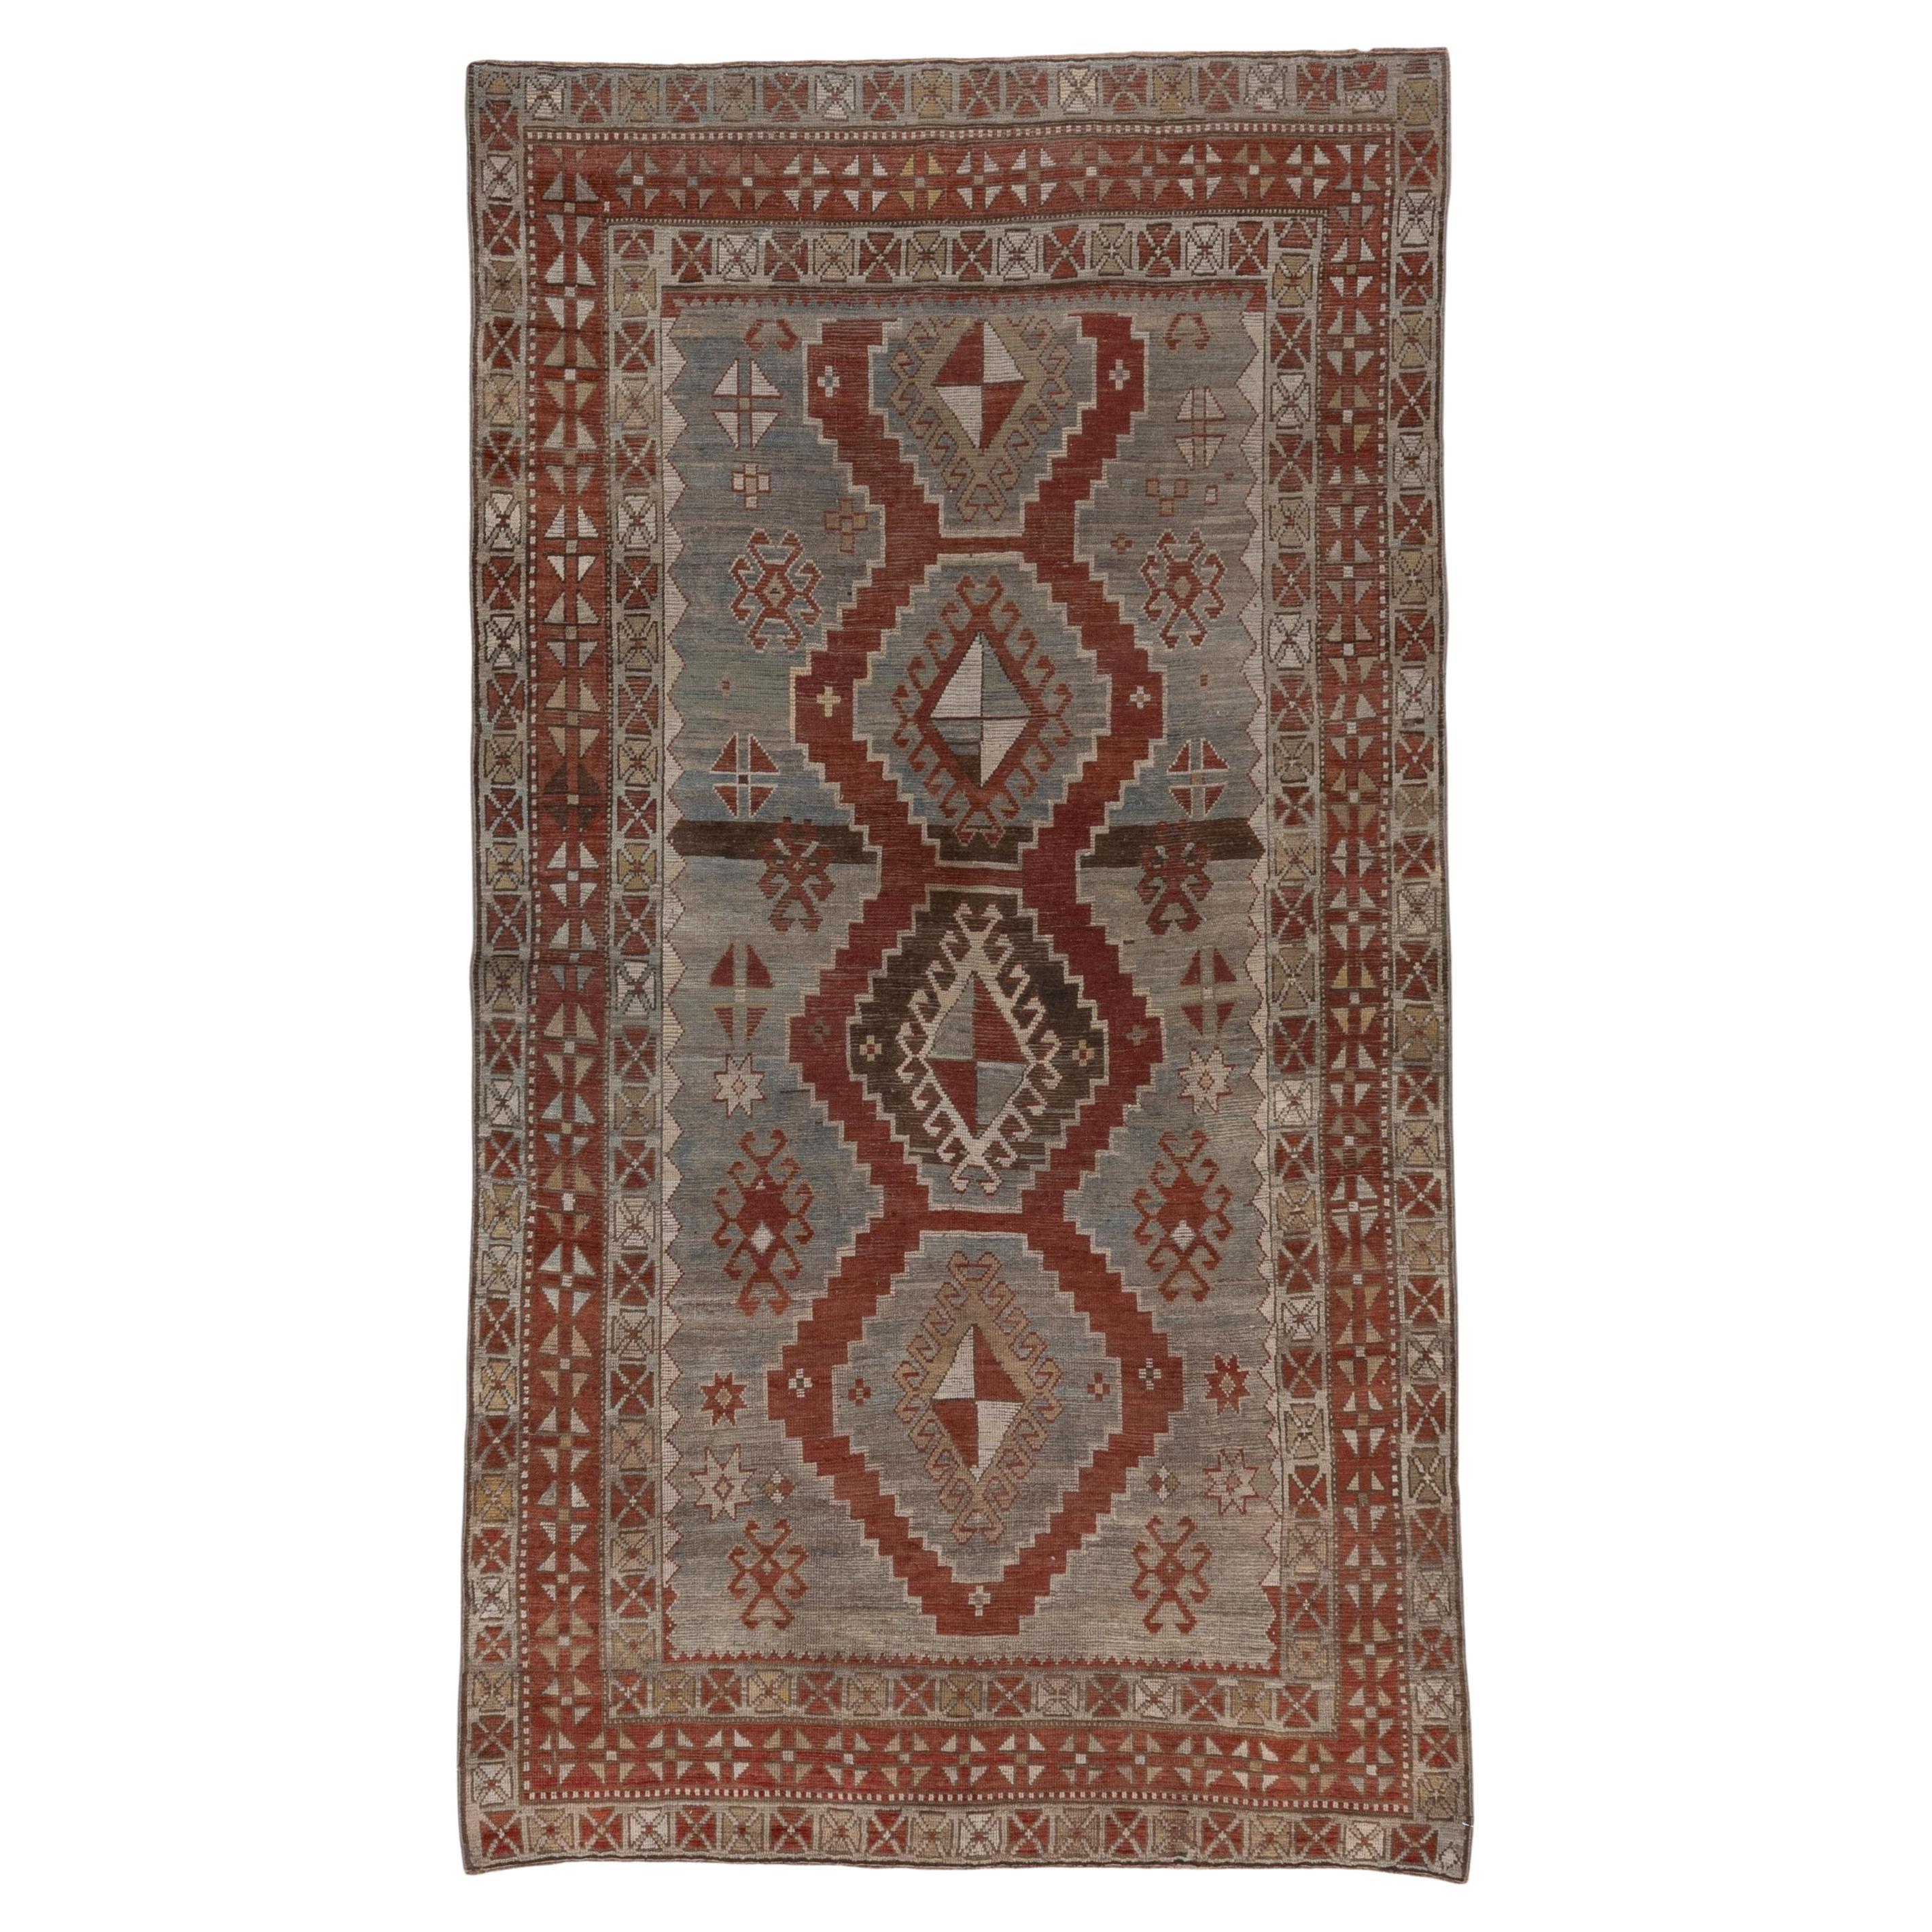 Antique Caucasian Karabagh Rug, Gray and Blue Field, Tribal, Red Borders